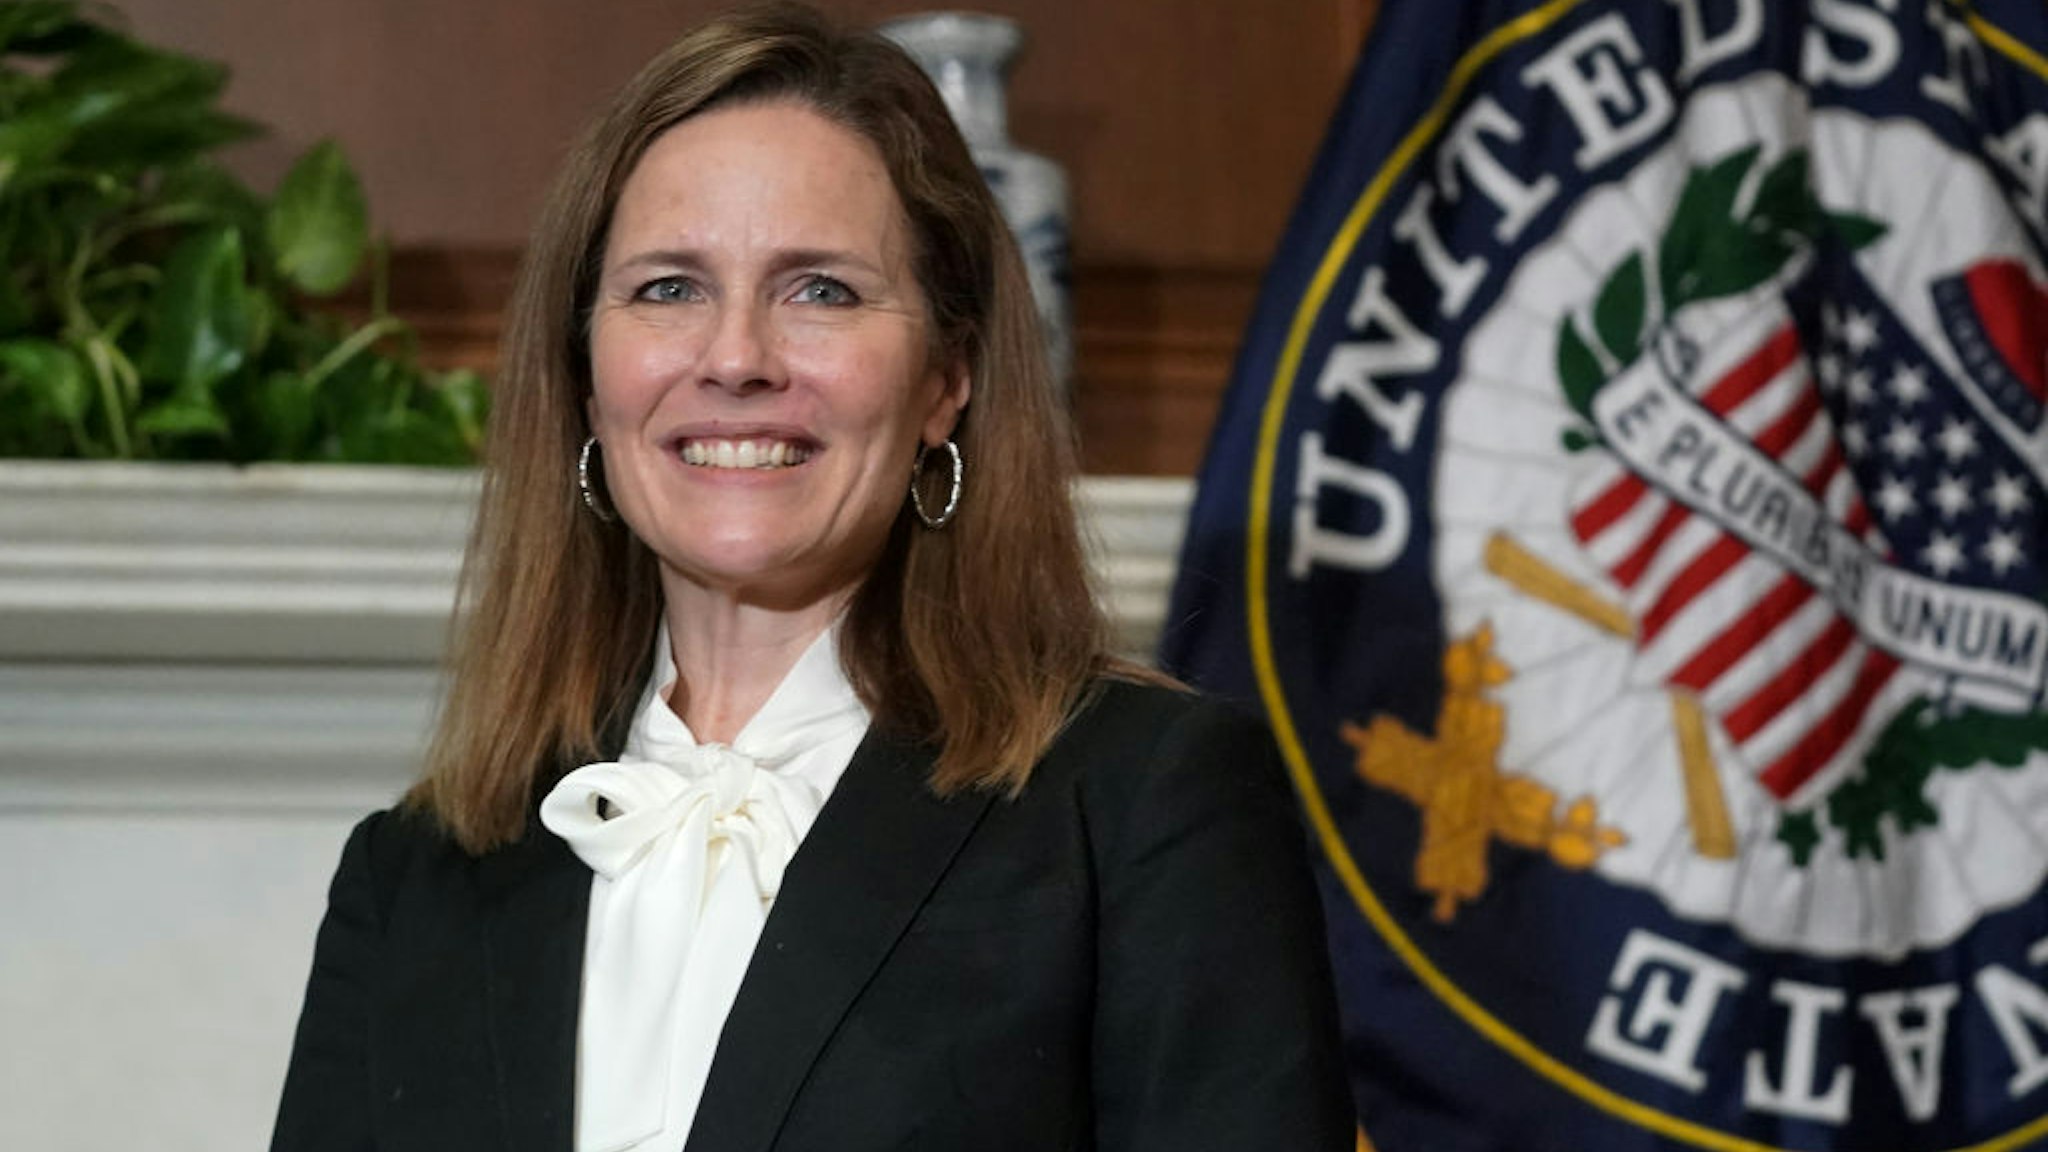 Seventh U.S. Circuit Court Judge Amy Coney Barrett, President Donald Trump's nominee for the U.S. Supreme Court, meets with Sen. Bill Cassidy (R-LA) as she prepares for her confirmation hearing, on Capitol Hill on October 1, 2020 in Washington, DC.